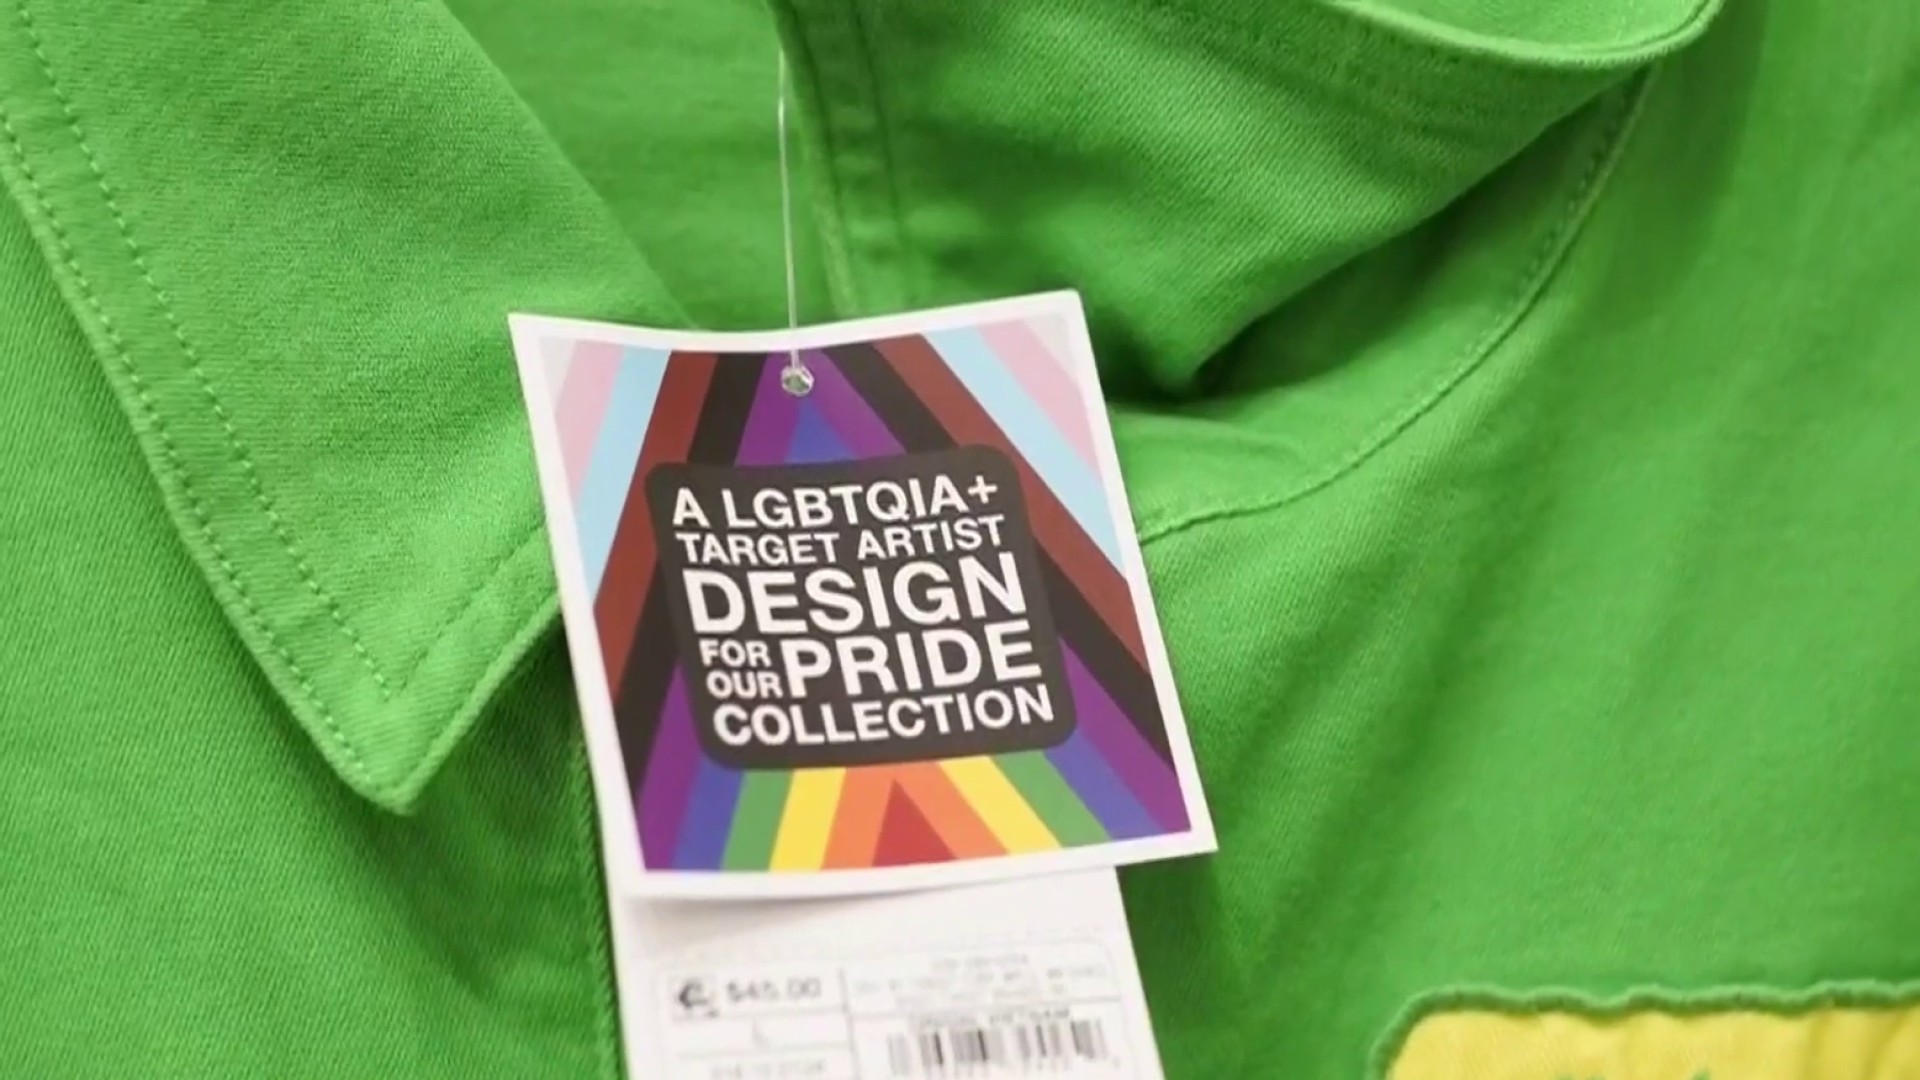 Large corporations forced to ‘balance’ pride campaigns amid threats of violence against employees